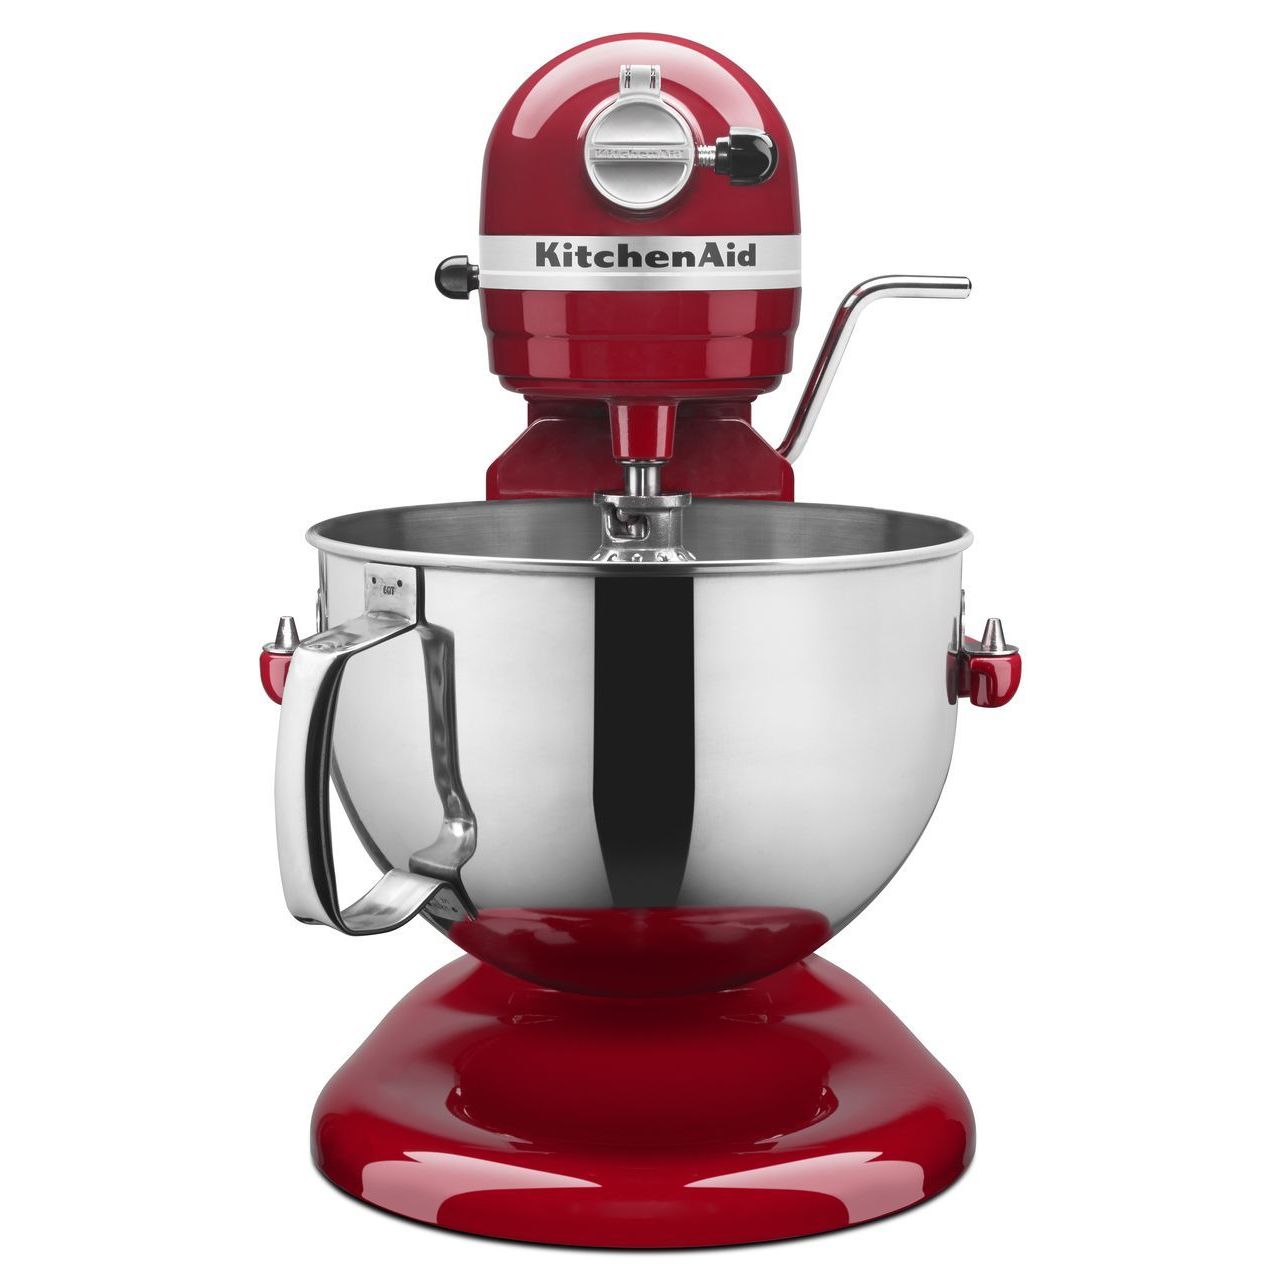 KitchenAid RKP26M1XER Empire Red 6-quart Pro 600 Bowl-Lift Stand Mixer  (Refurbished) (As Is Item) - Bed Bath & Beyond - 14803860